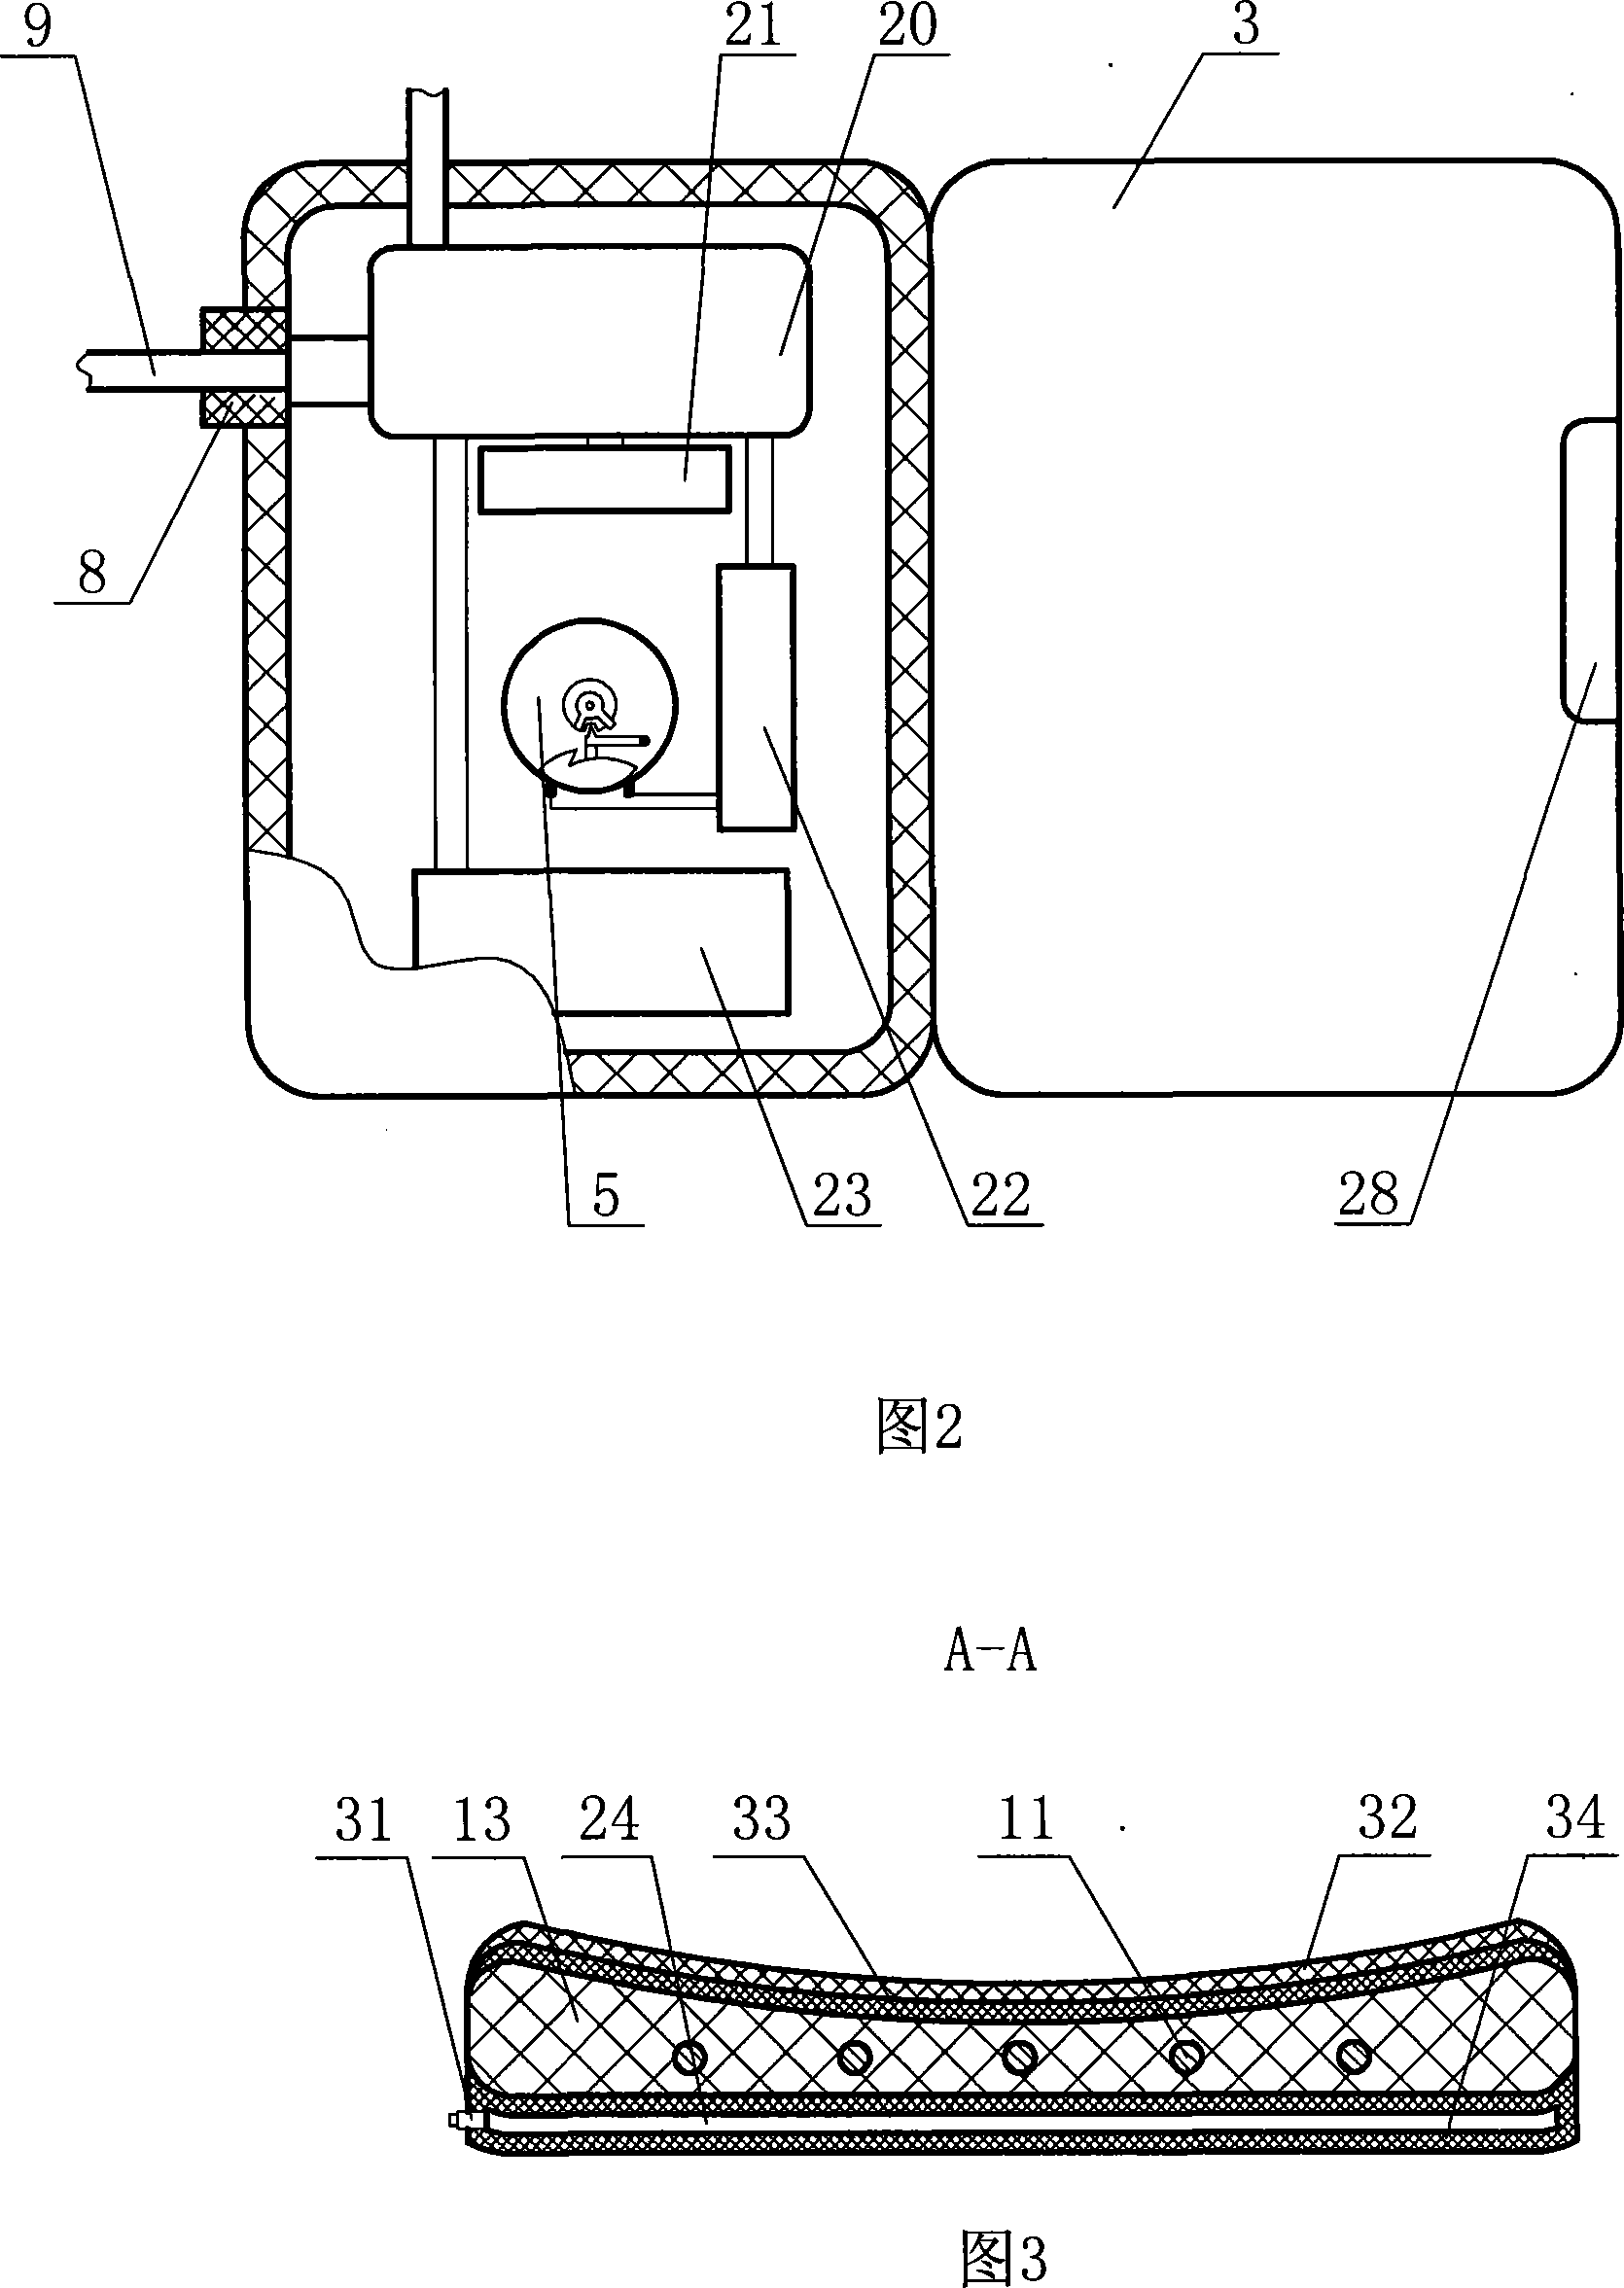 Male electro-heat constant temperature contraceptive device for external application